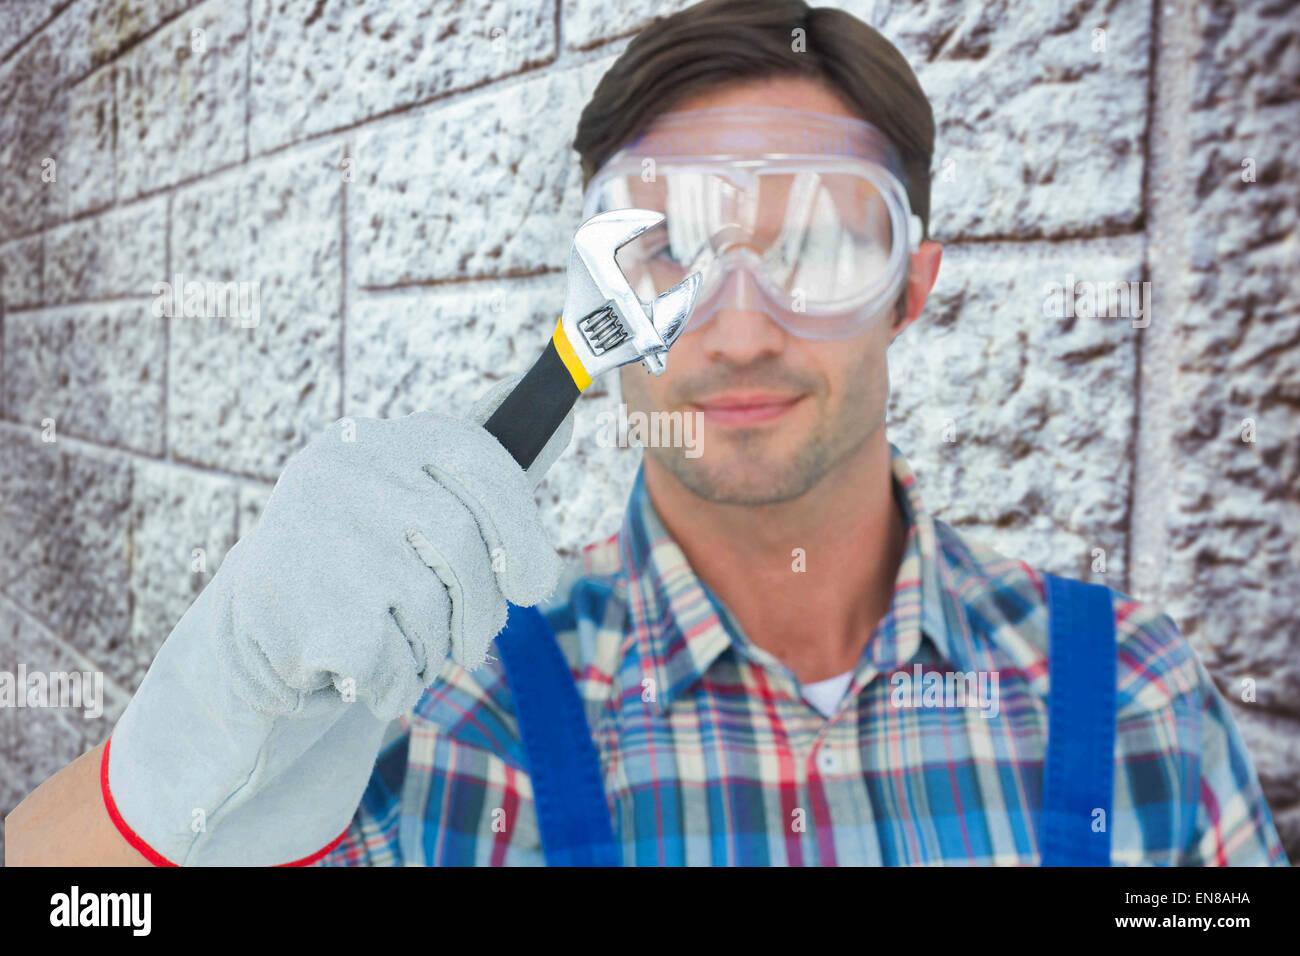 Composite image of plumber holding adjustable wrench Stock Photo